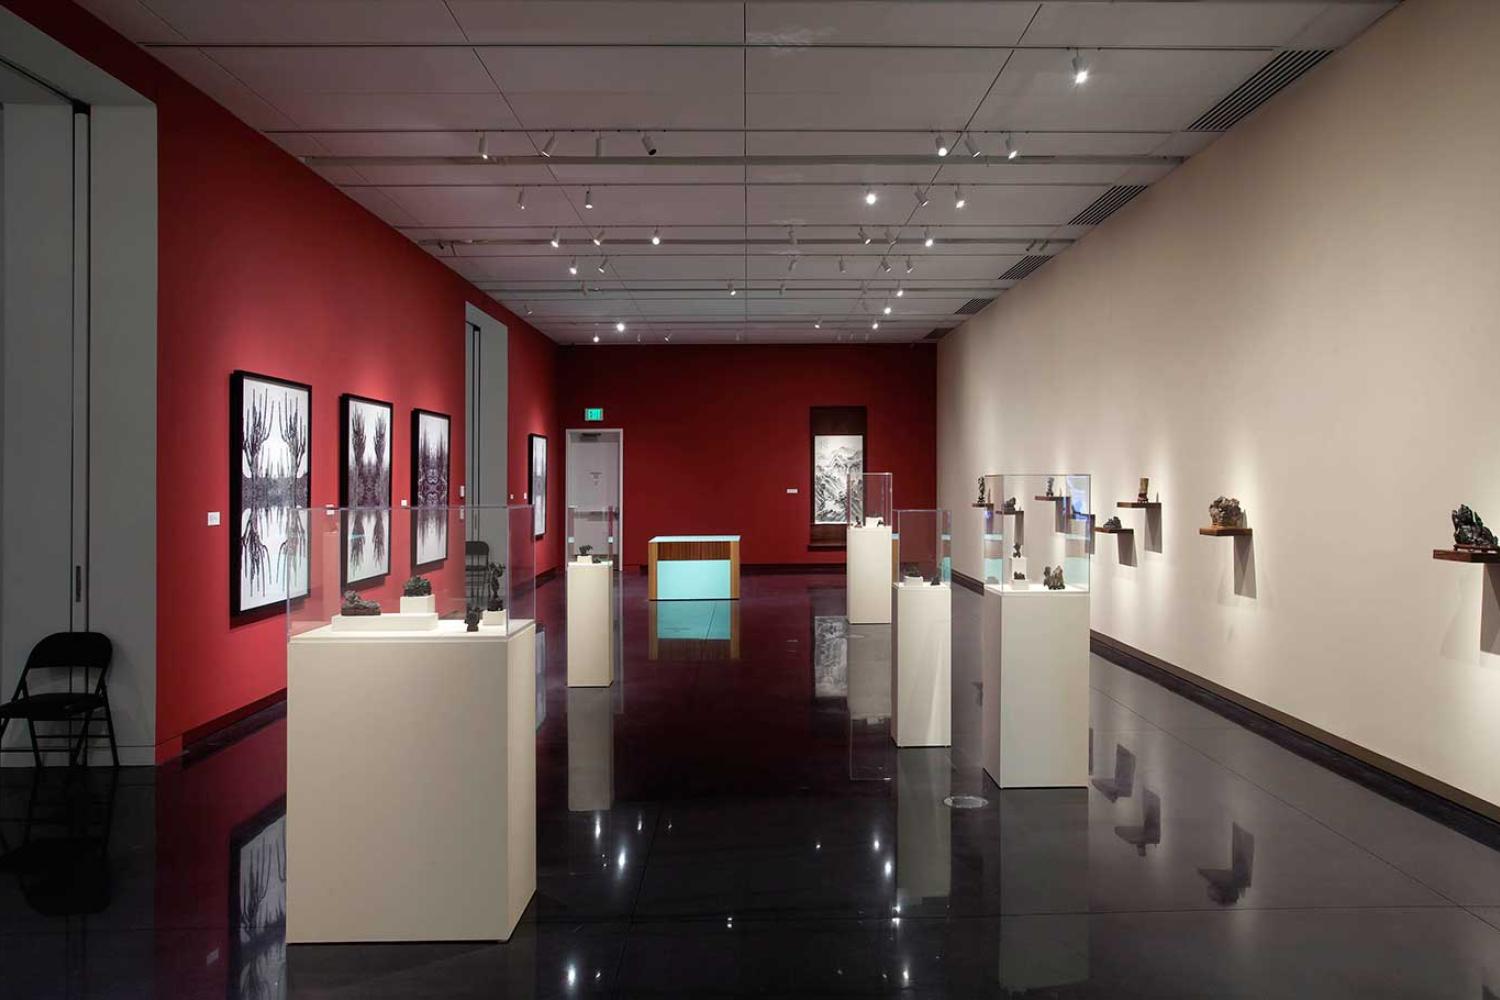 Installation view of exhibition featuring scholar's rocks and hung works